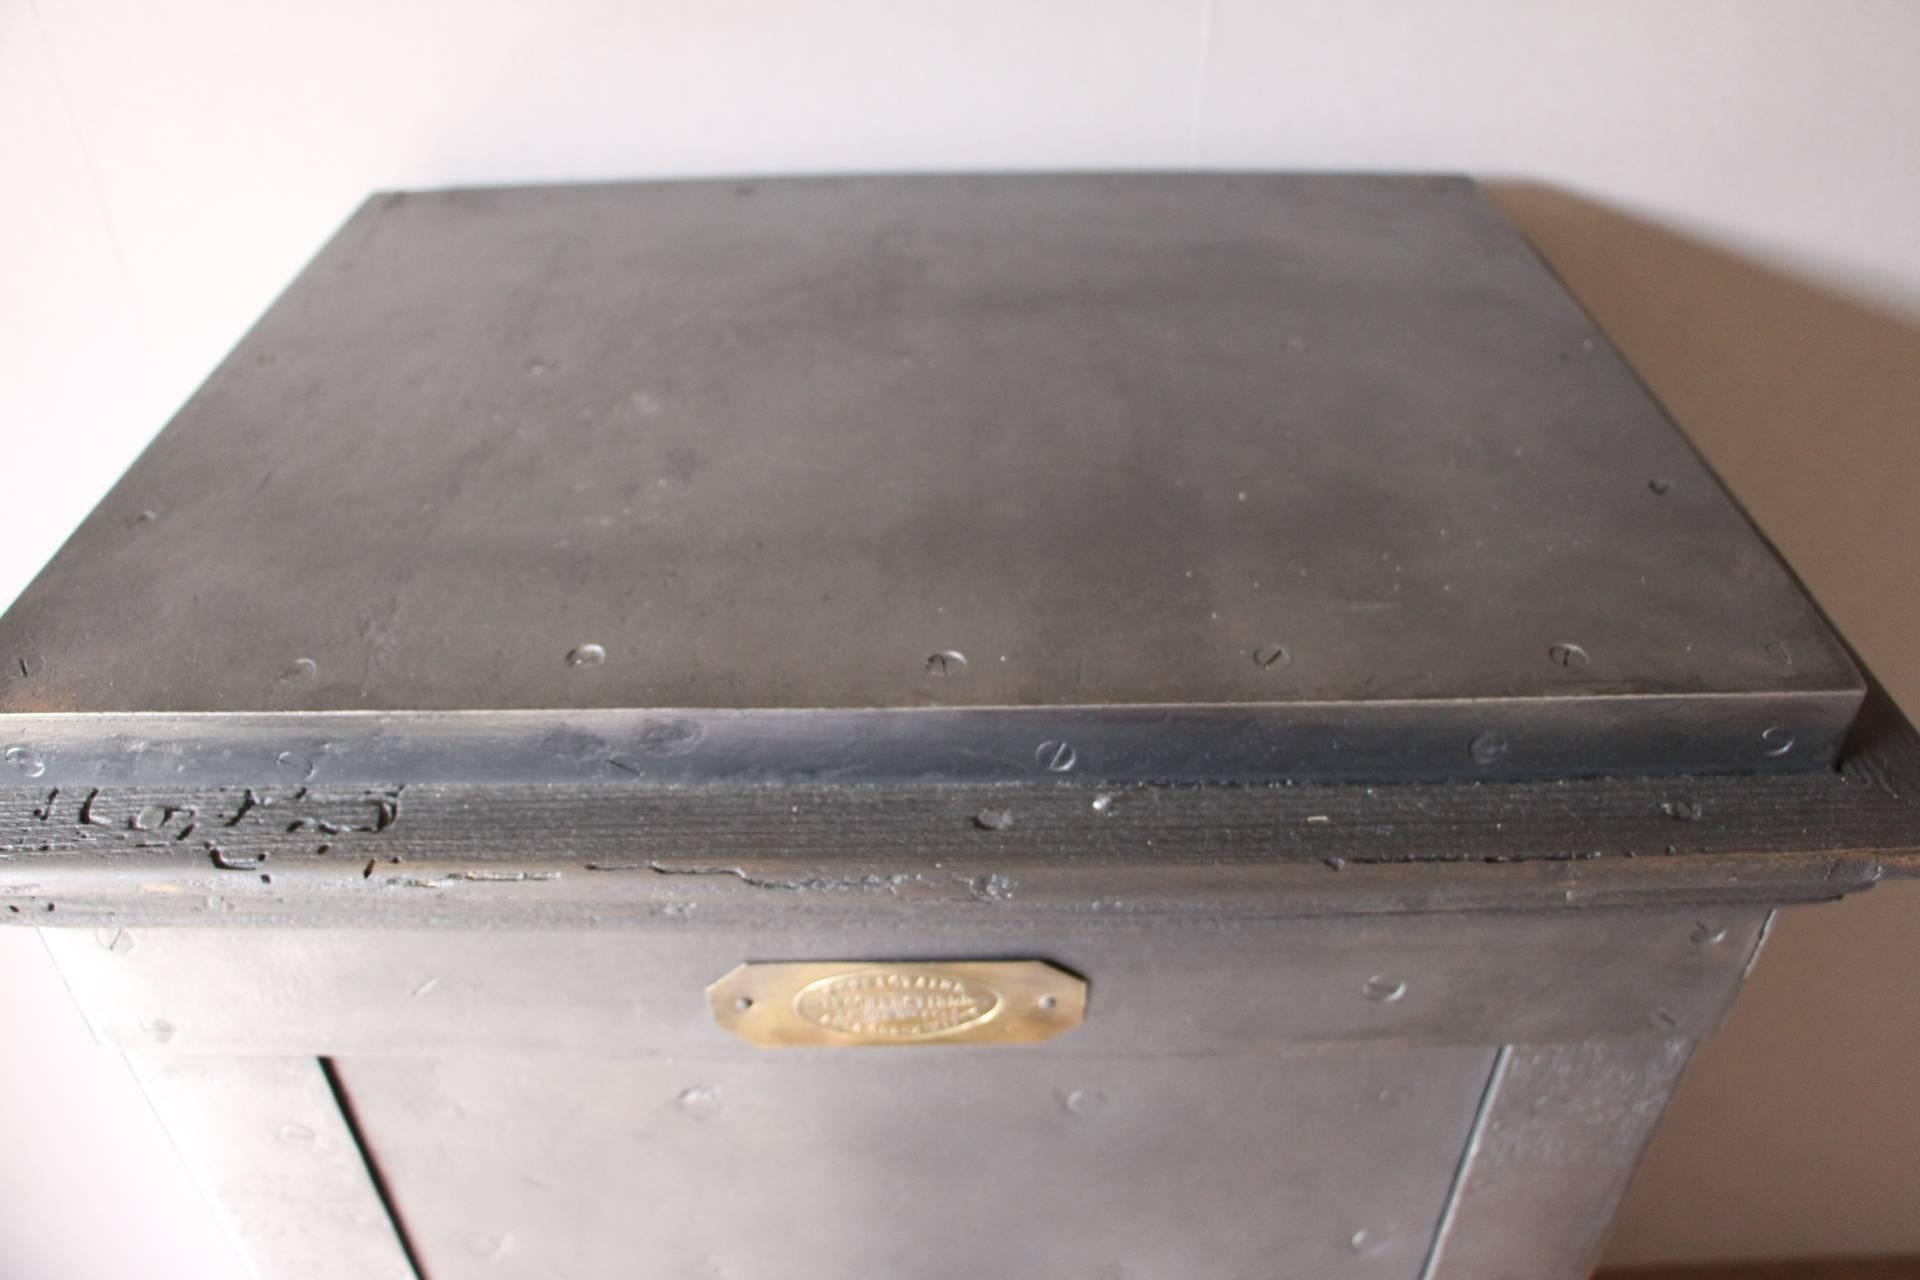 Beautiful French steel and iron safe opening with its keys and its four letters' combination. Fully functional. It features two doors, one on the top and another one in its base.
The top door reveals a very sturdy mechanism closing thanks to an